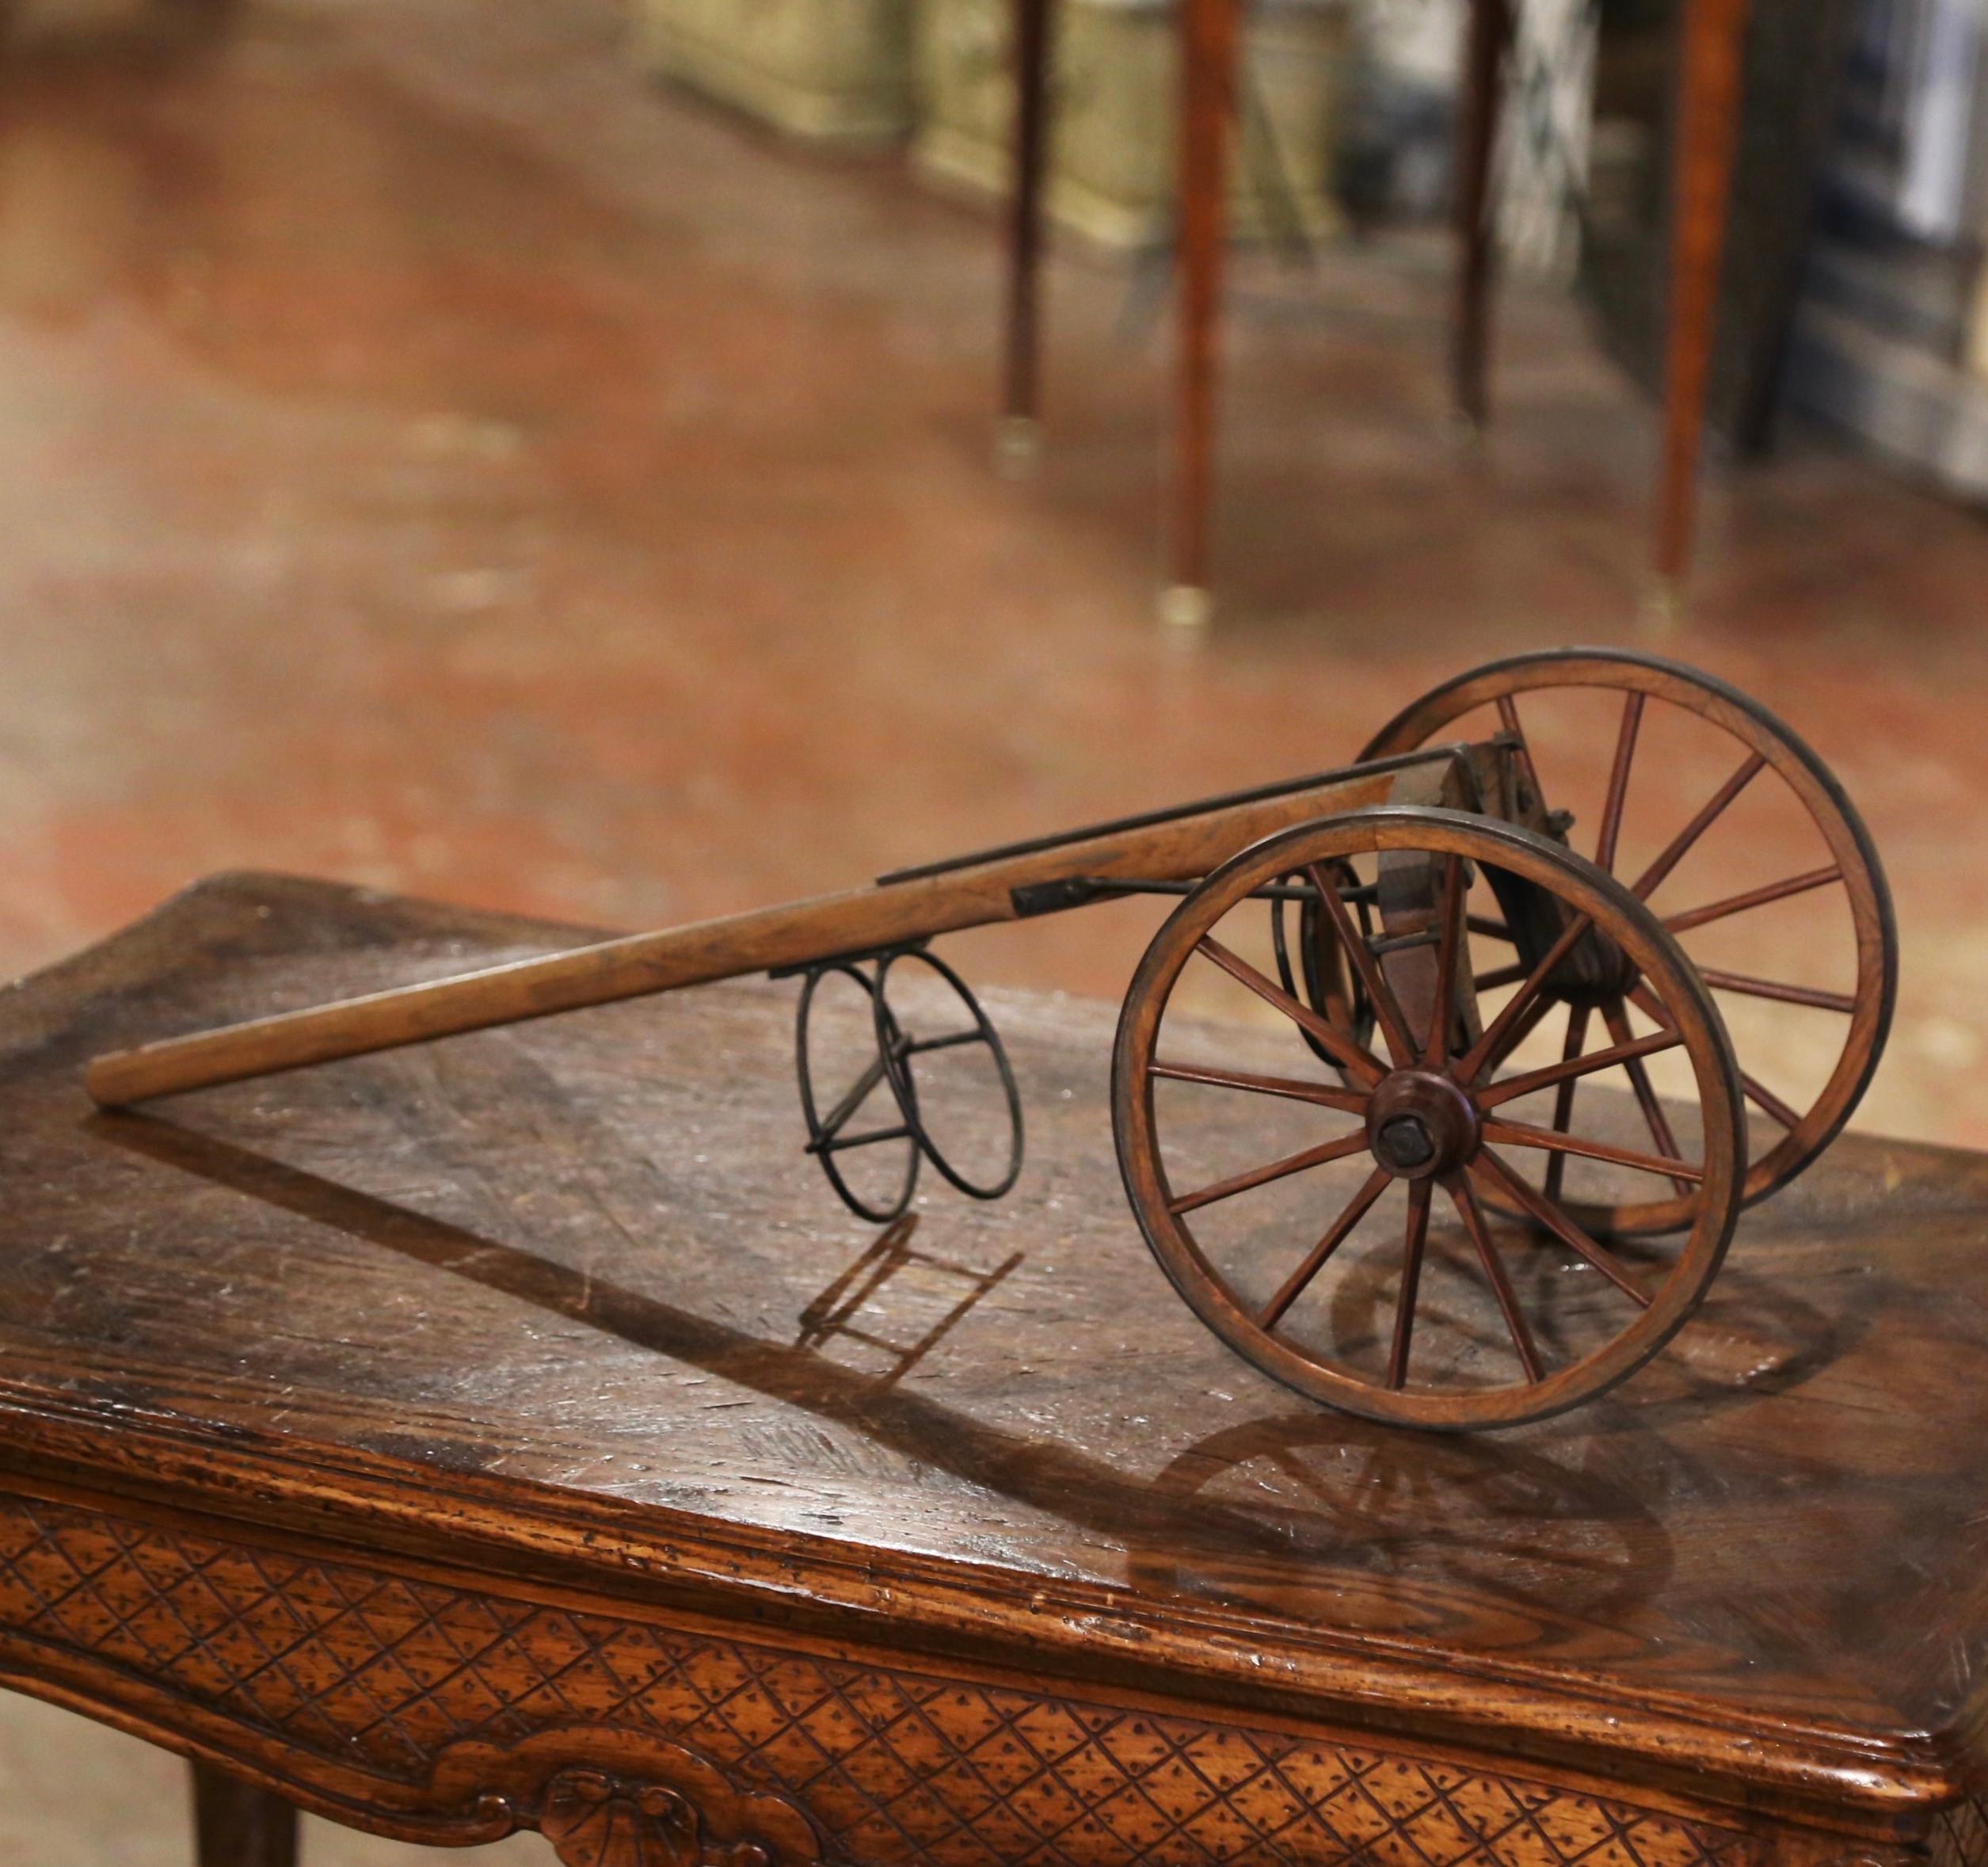 Decorate a dining table or a wine cellar with this elegant antique wine bottle display. Crafted in France circa 1920, the trolley made of oak wood and iron features a wine bottle holder set over two wheels with a pulling wooden handle. The cart is